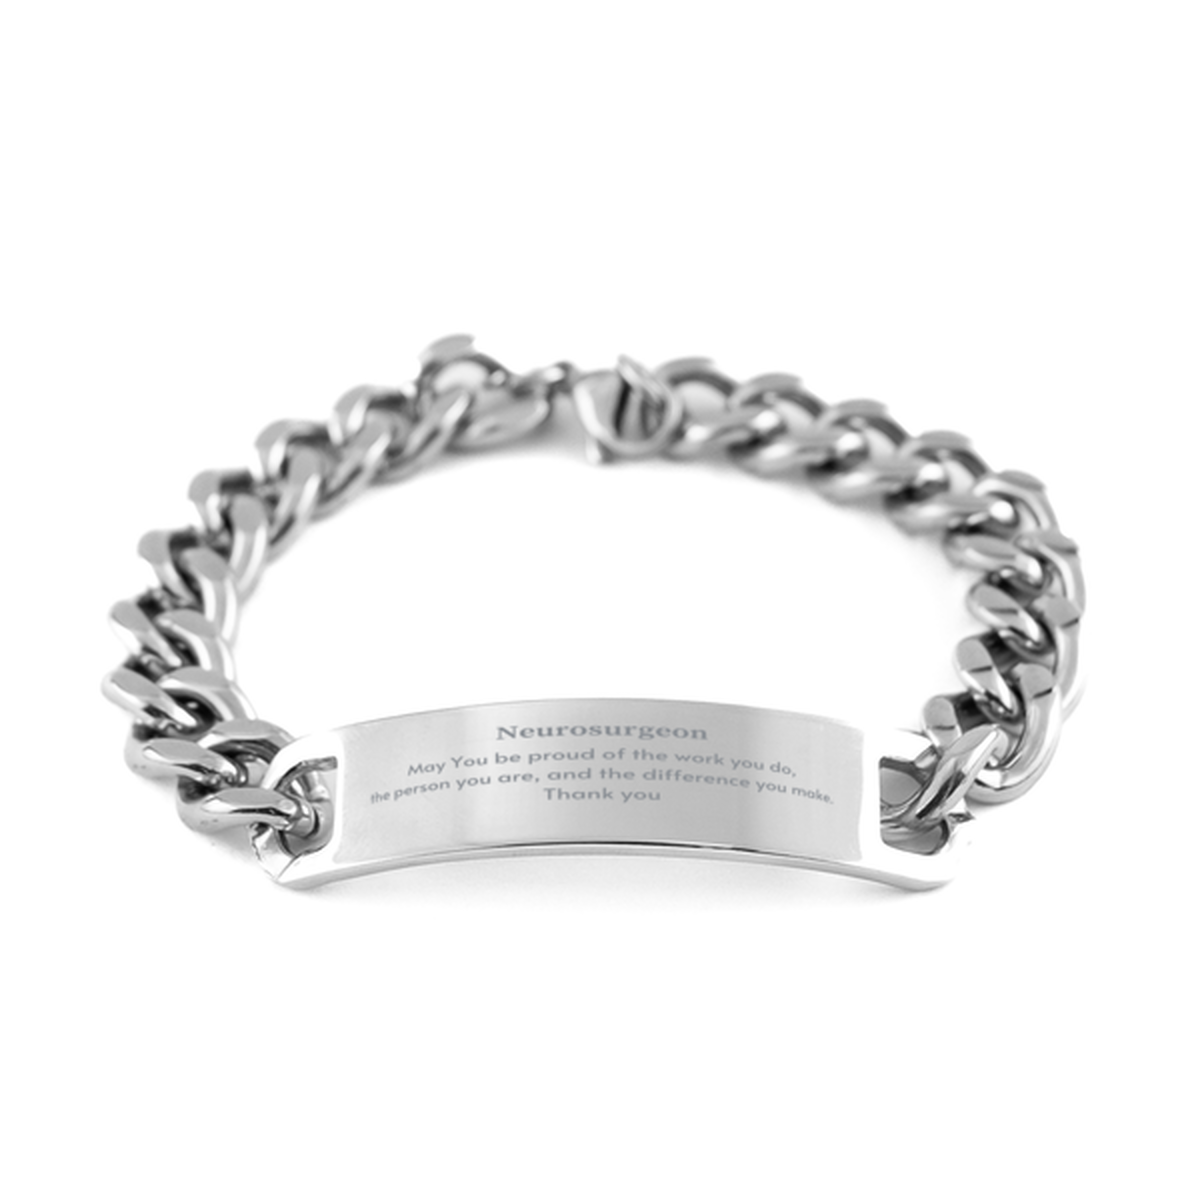 Heartwarming Cuban Chain Stainless Steel Bracelet Retirement Coworkers Gifts for Neurosurgeon, Neurosurgeon May You be proud of the work you do, the person you are Gifts for Boss Men Women Friends